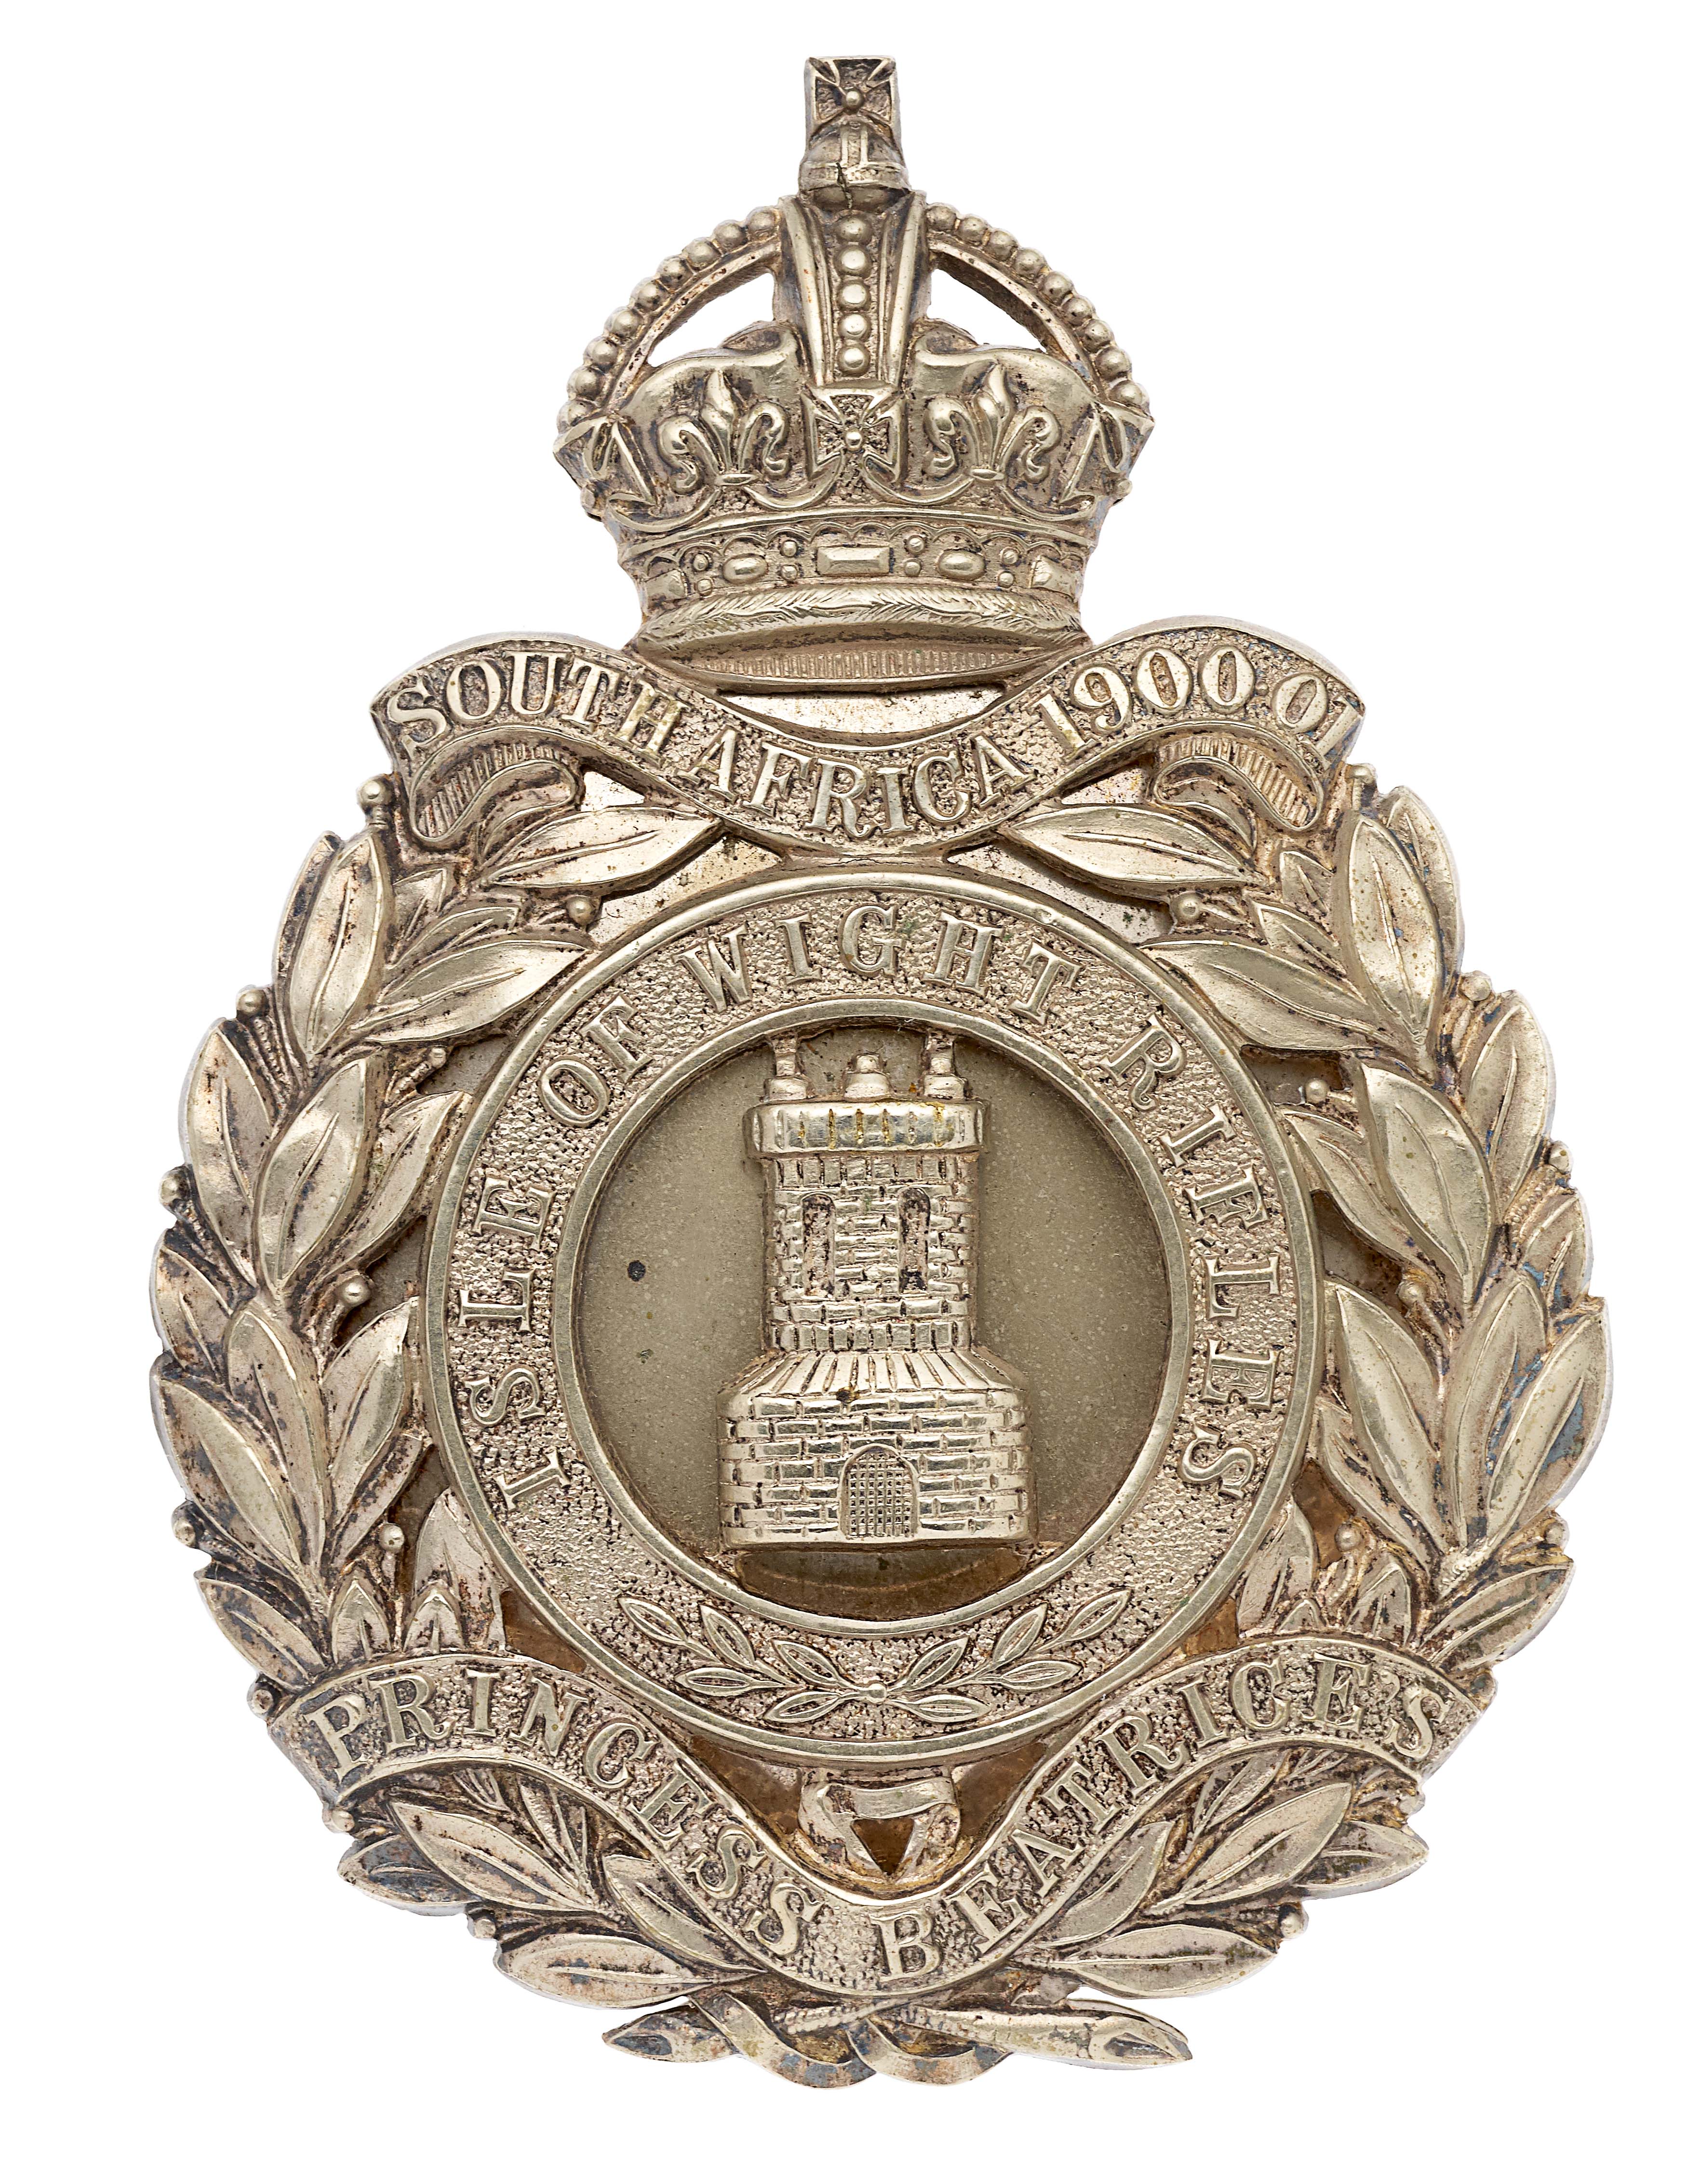 Isle of Wight Rifles, Hampshire Officer’s post 1908 pouch belt plate.